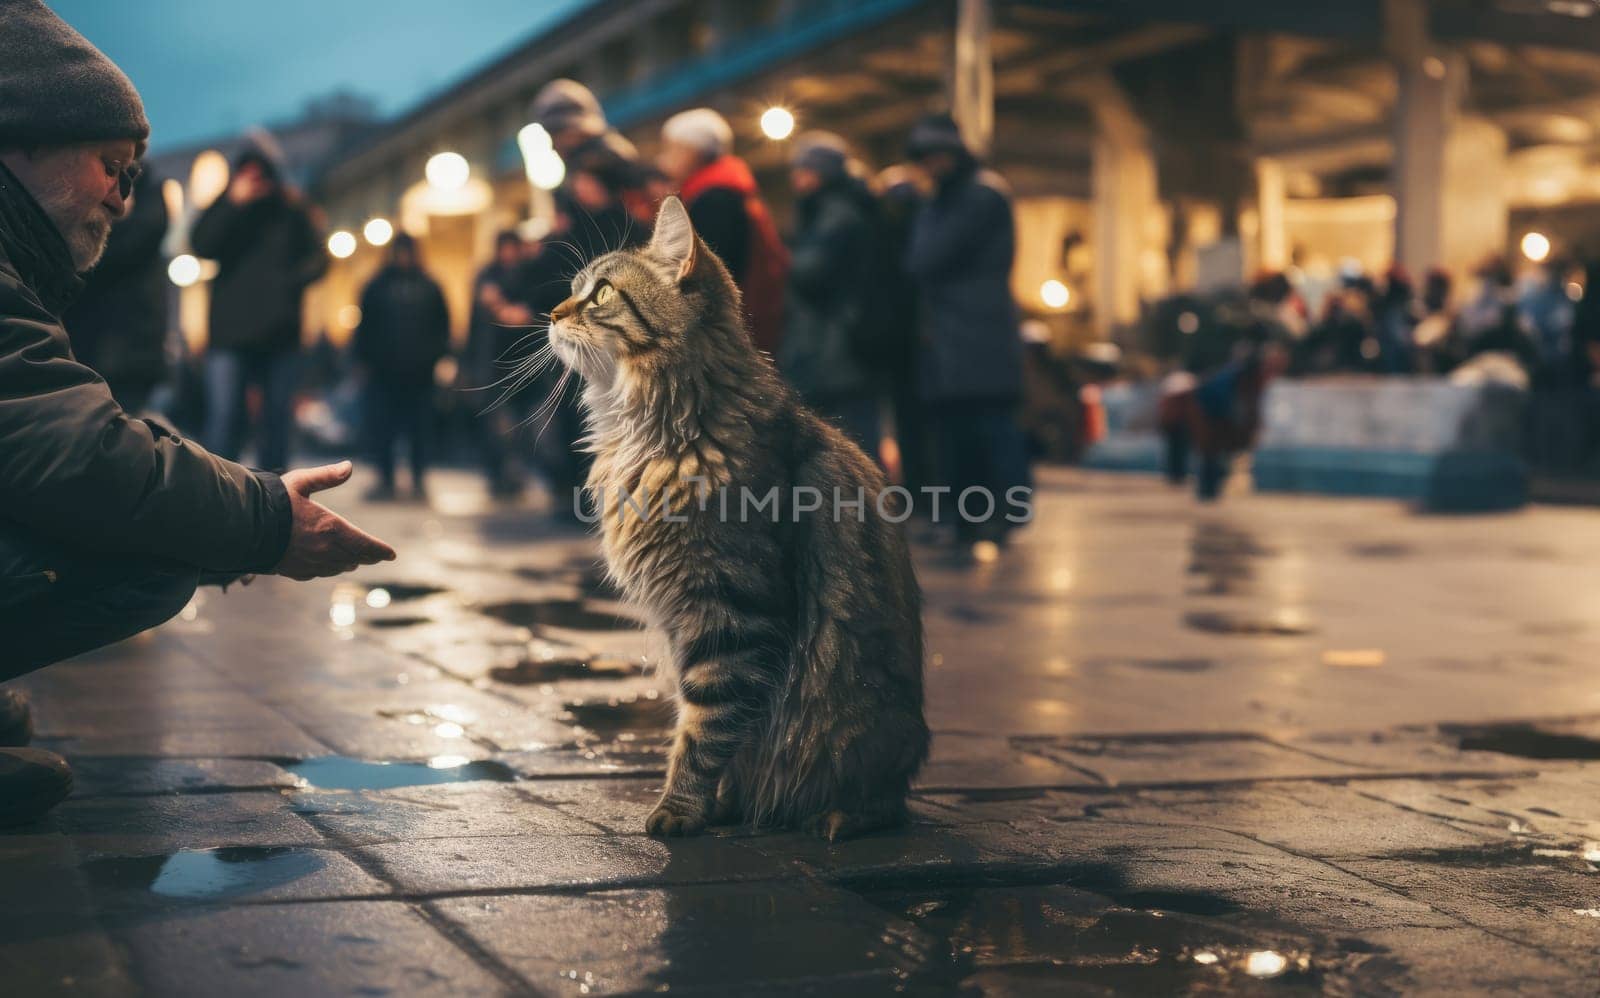 A lone cat finds solace and nourishment in the outstretched hand of a compassionate stranger on a dark and stormy night.